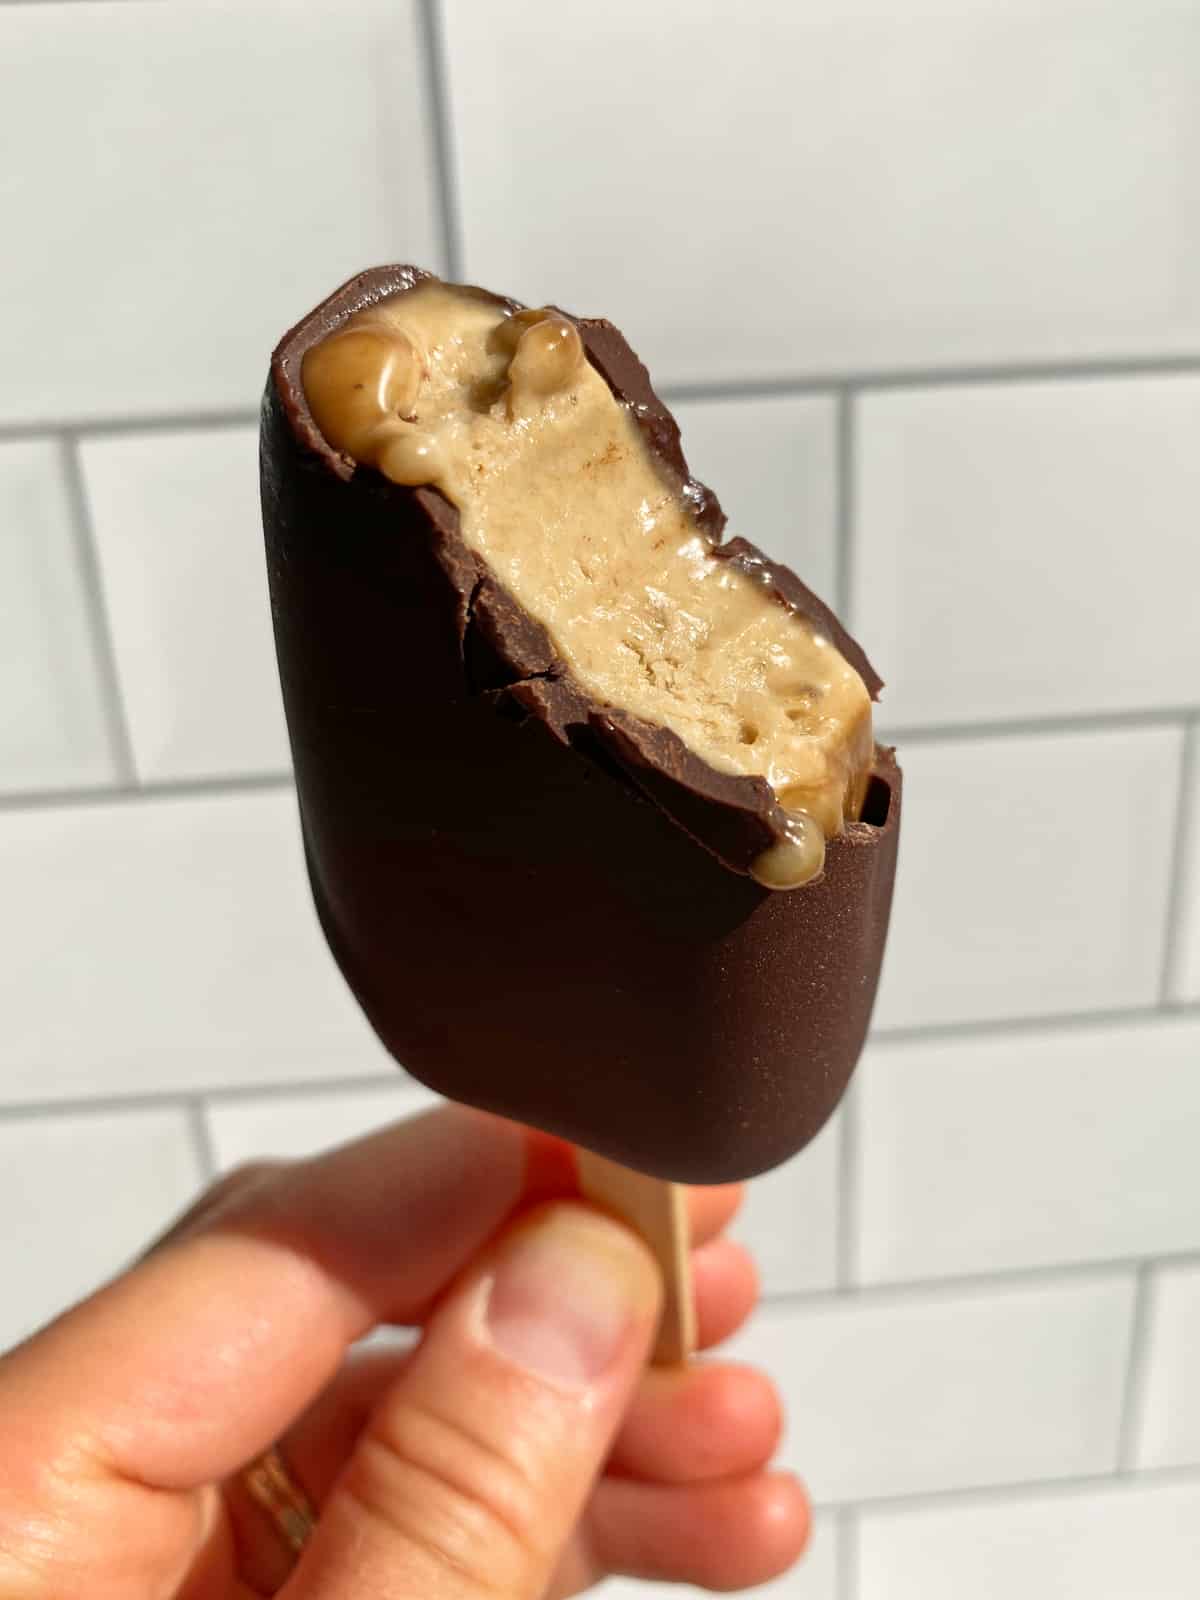 holding an ice cream bar with a bite out of it to show the inside texture